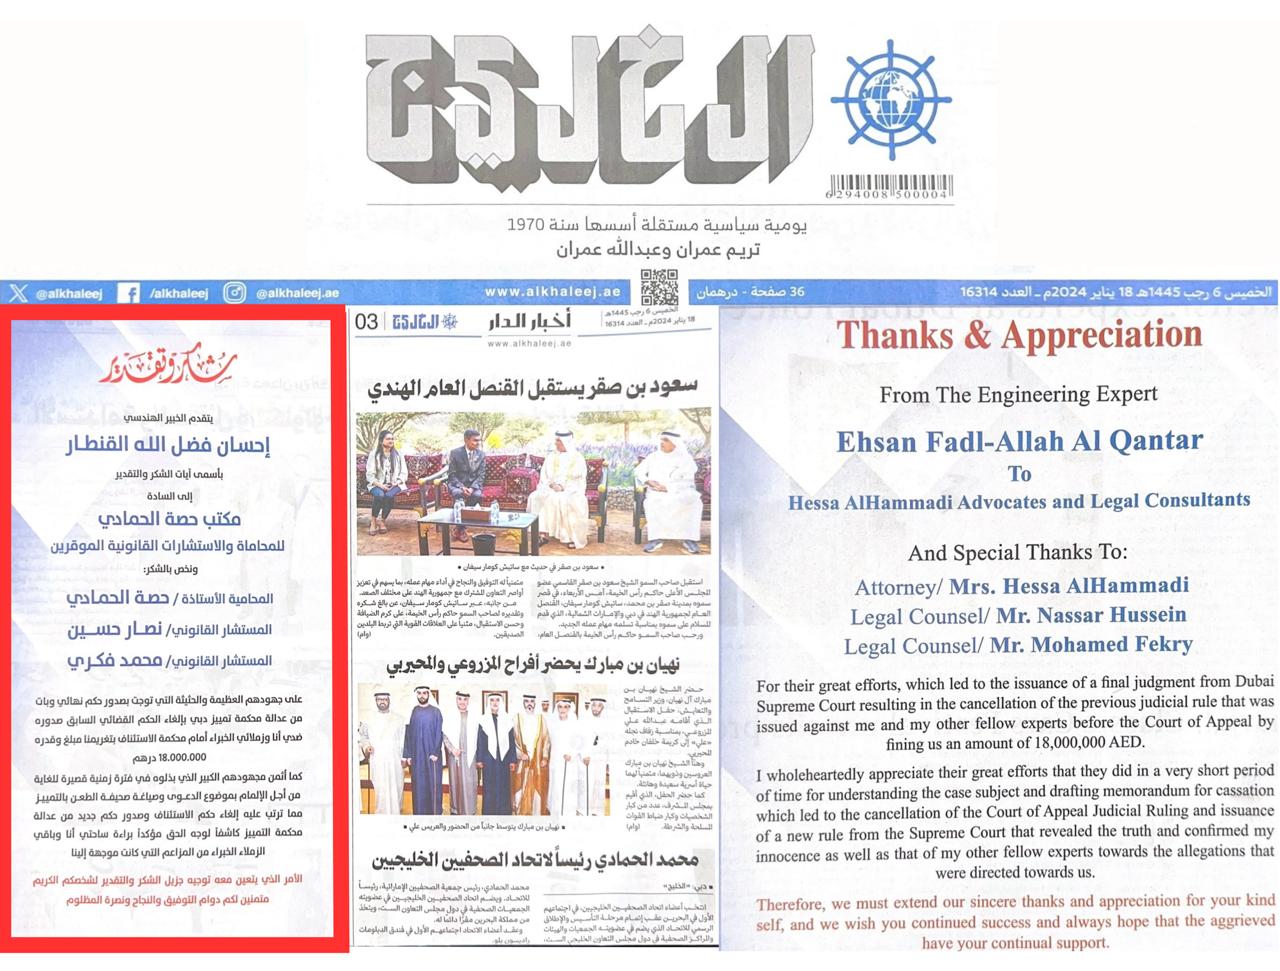 “Appreciation notes were published by the engineering experts in leading newspapers in the UAE expressing their gratitude for Hessa Al Hammadi Advocates & Legal Consultants LLC-SO which obtained landmark ruling in Cassation Courts in Dubai which led to overturning of Appeal Courts ruling which obliged the experts to pay compensation of 18 million dirhams” 